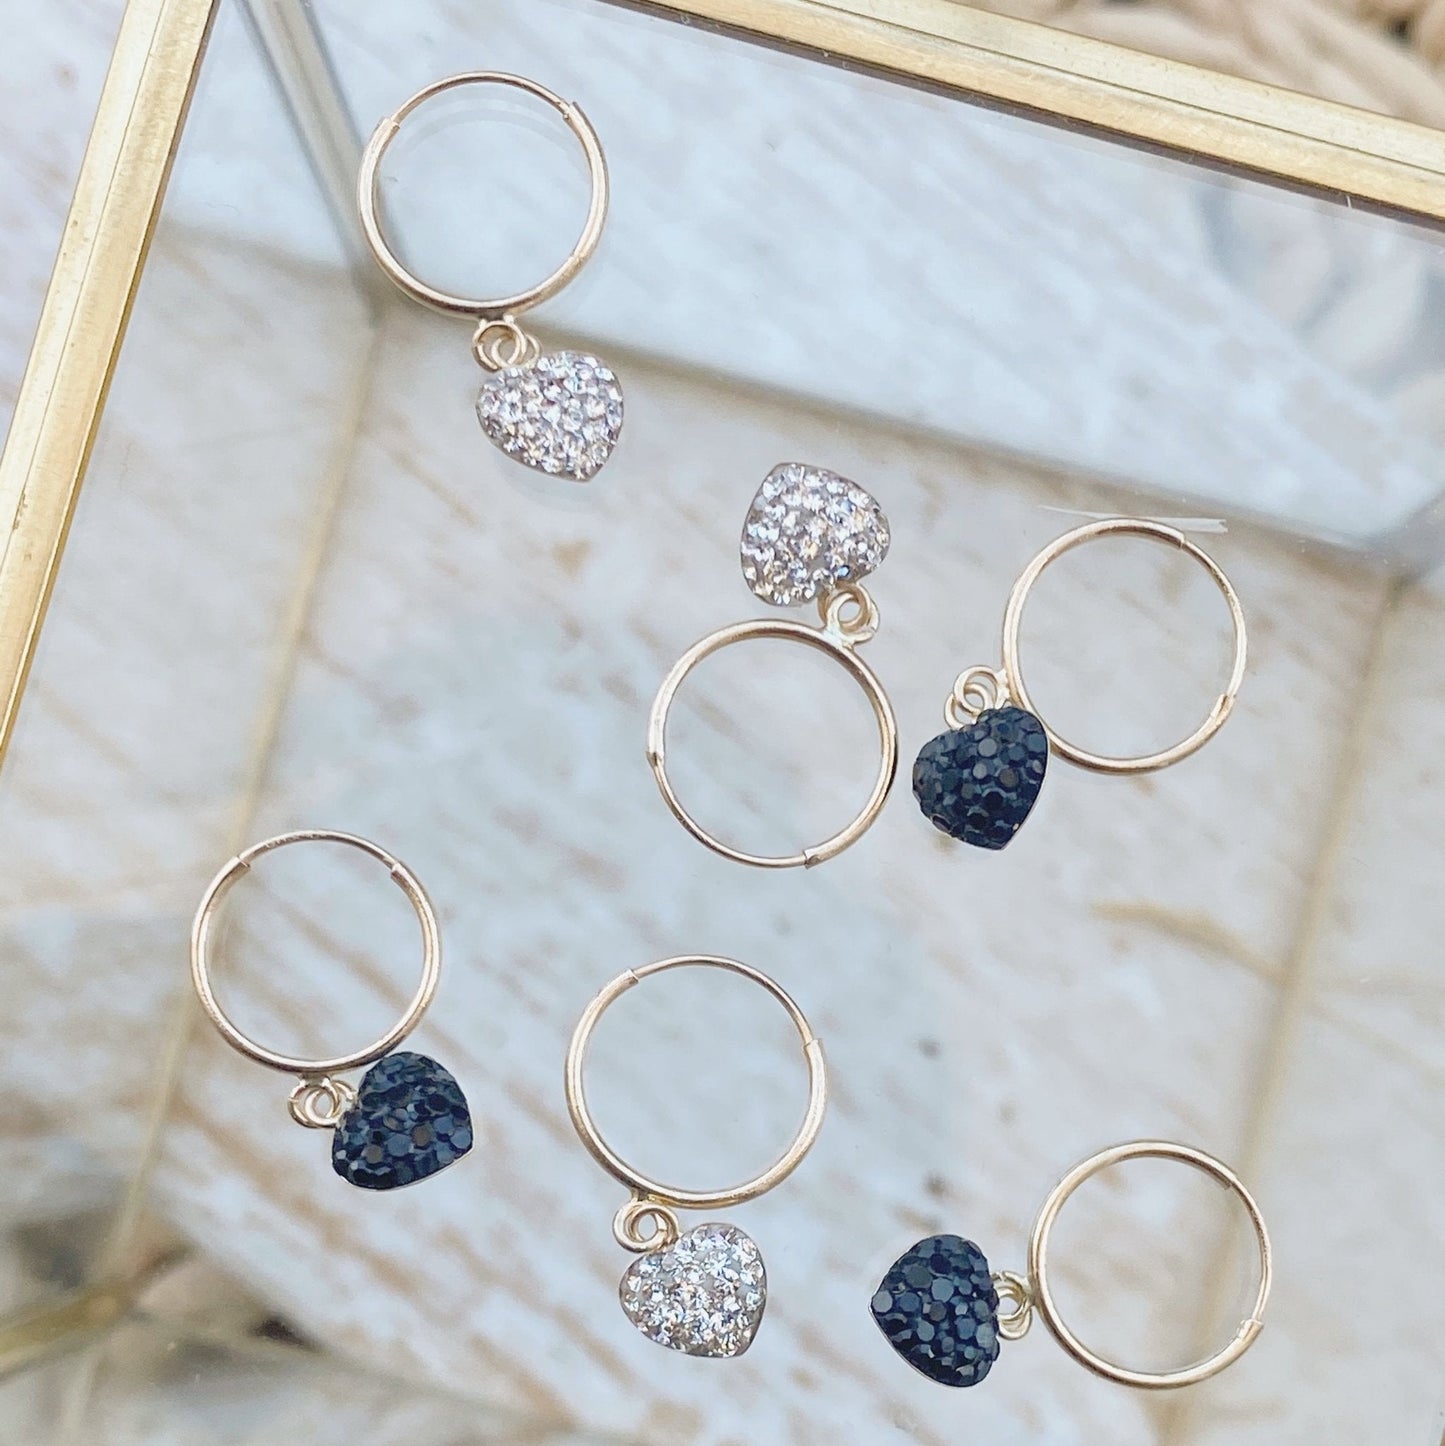 This set of heart earrings features a gold hoop and heart dangle drop. Our 10K gold huggie hoops are perfect for cartilage piercings or any other earring holes. A gorgeous addition that is sure to catch attention and make you feel beautiful!